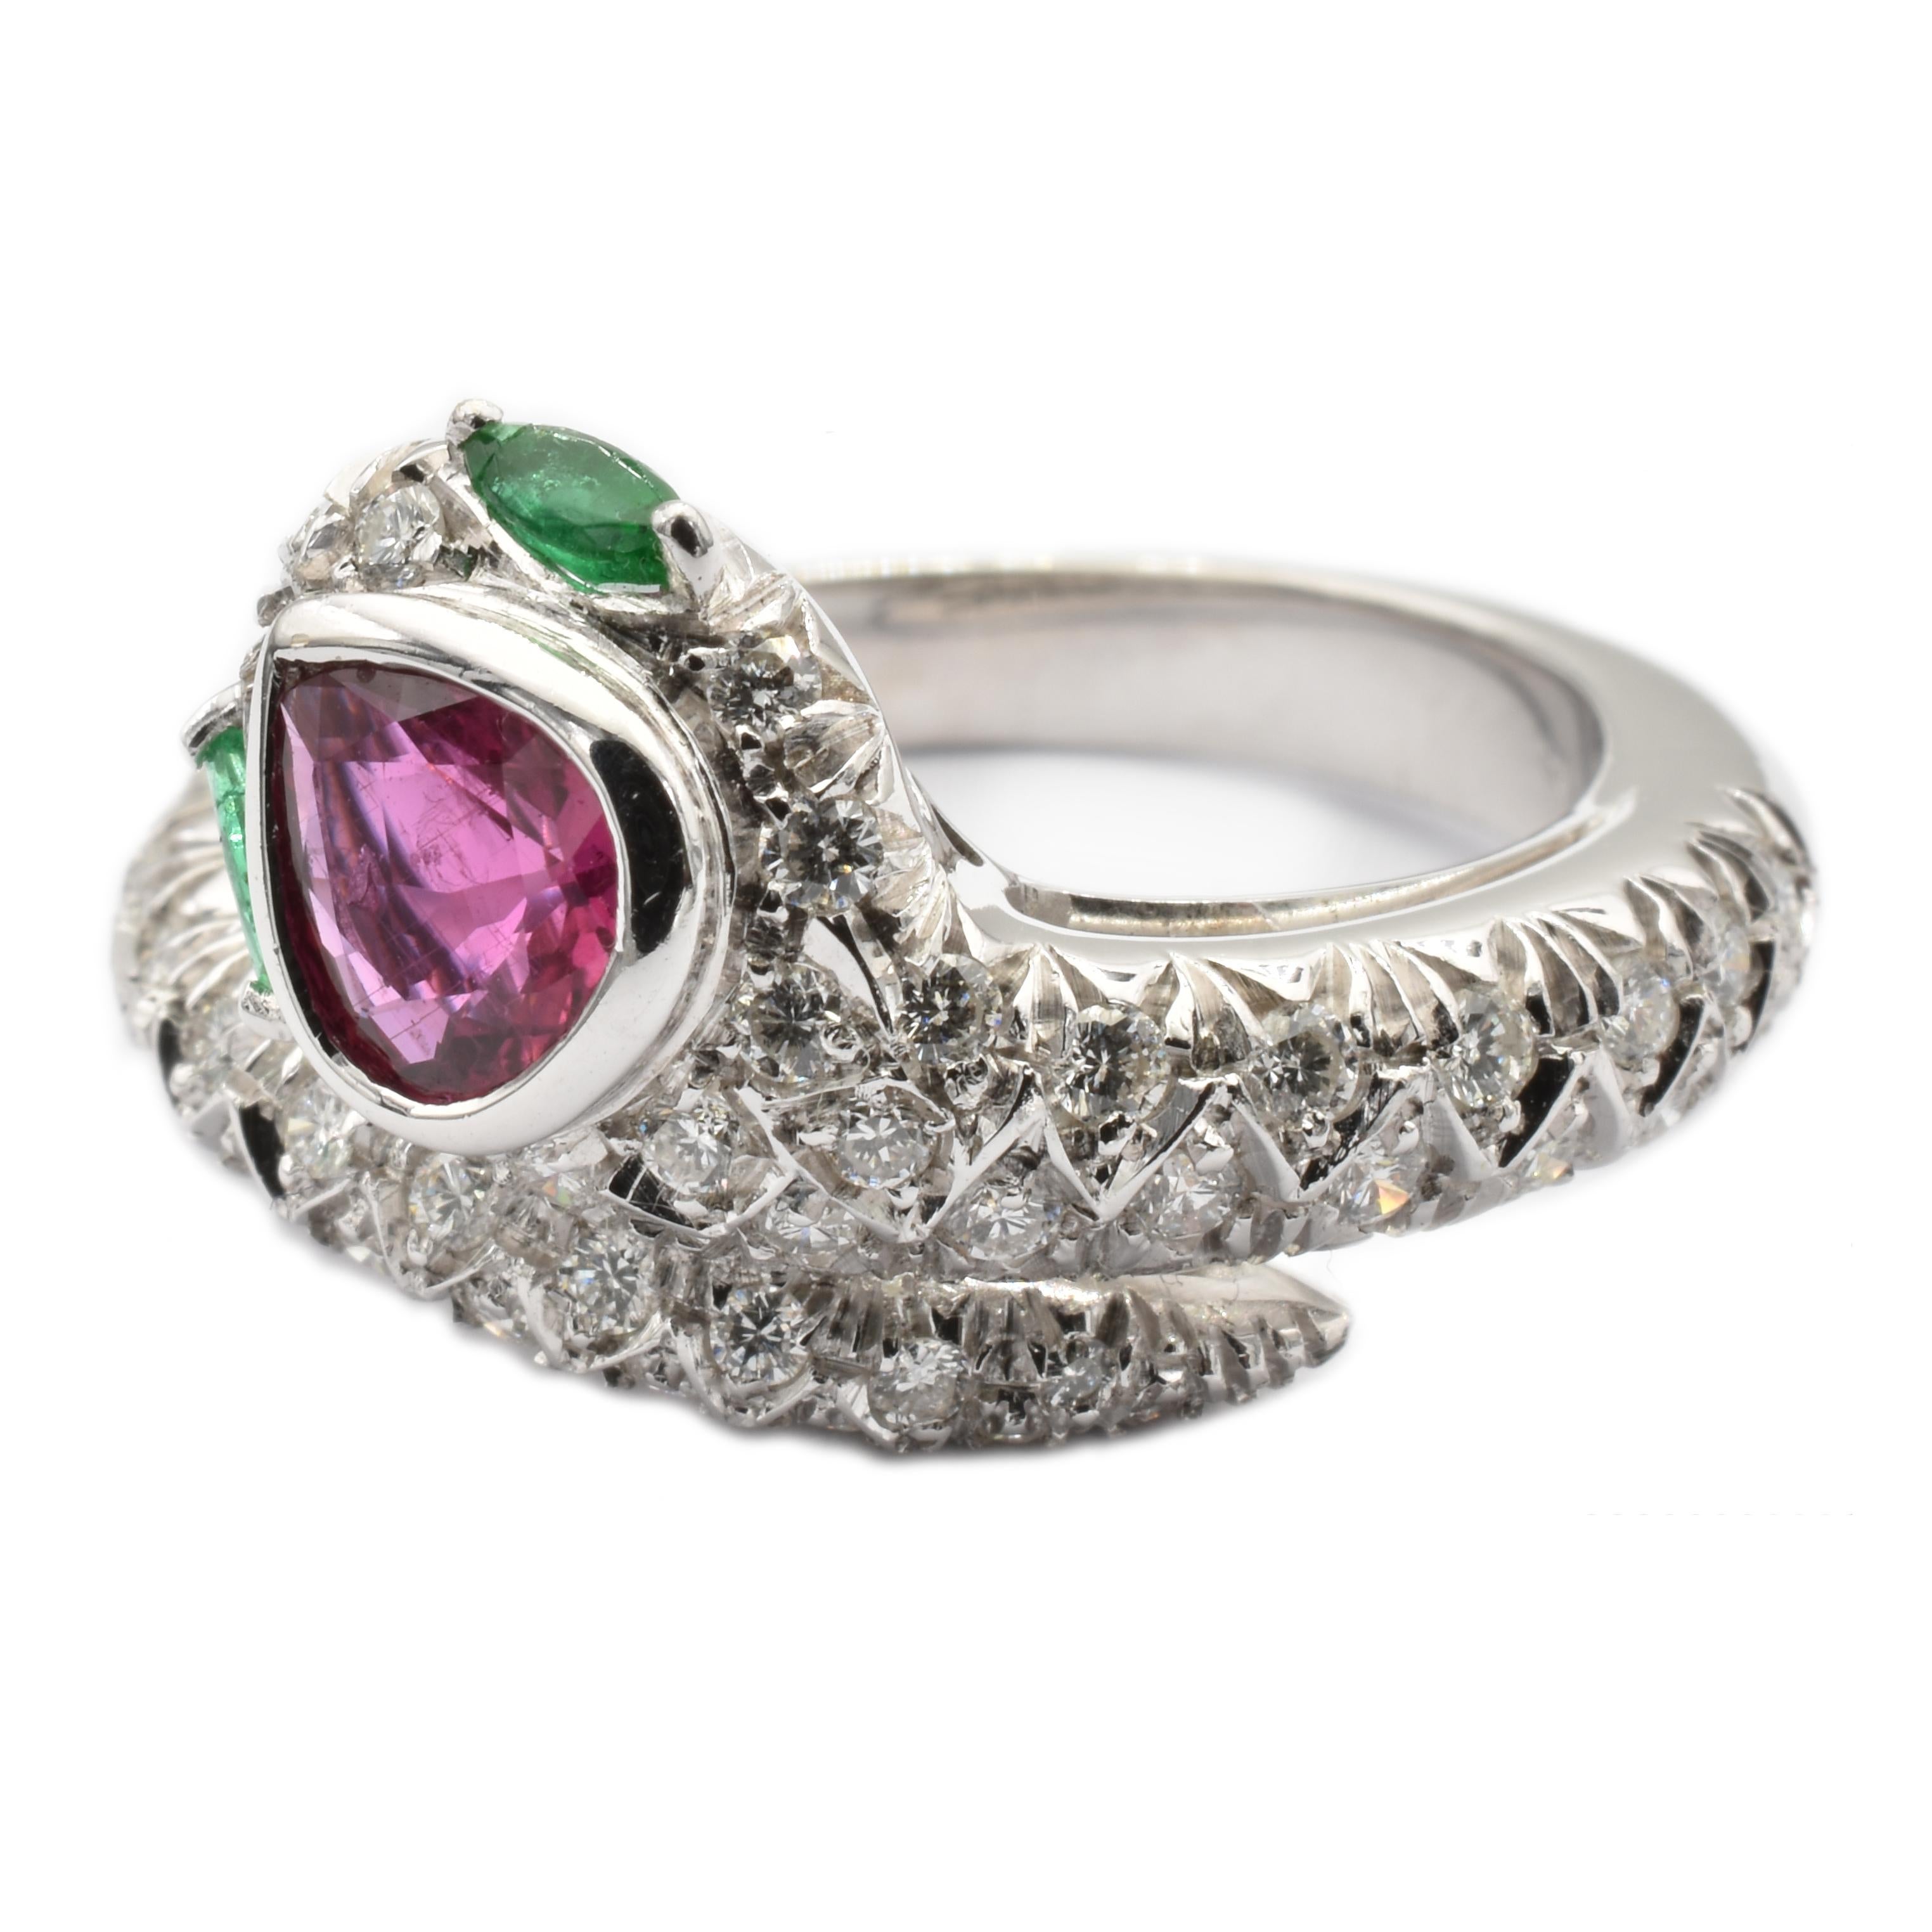 Gilberto Cassola 18Kt White Gold Snake Ring with a Pear Ruby, two Marquise Emeralds and Diamonds.
Handmade in our Atelier in Valenza Italy.
Intense Red Natural Ruby Pear sized mm 7.80 X 4.20.  Weight ct 0.77
Bright Green Natural Emerald Marquises